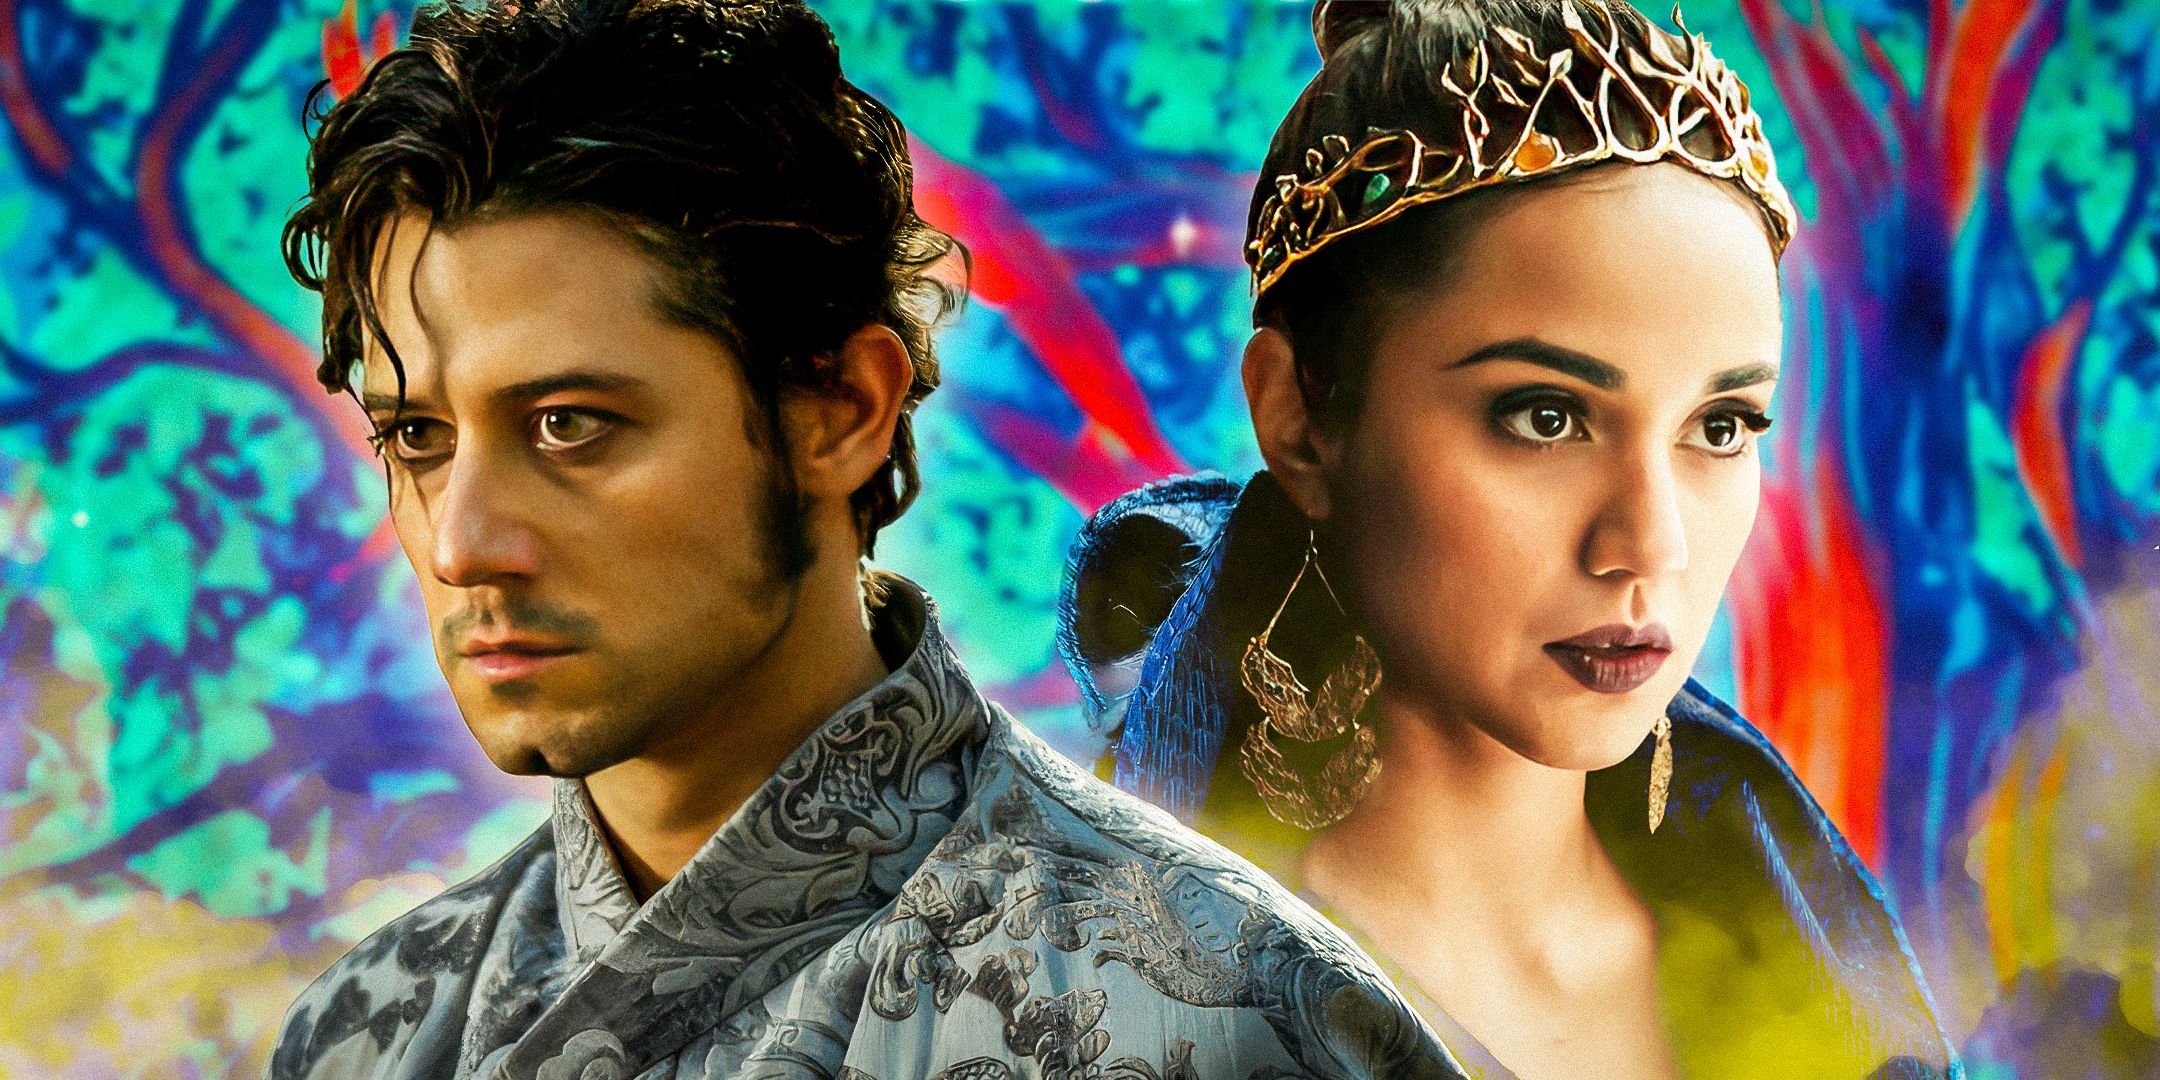 Hale Appleman as Eliot Waugh Nameless and Summer Bishil as Margo Hanson Margolem from The Magician 